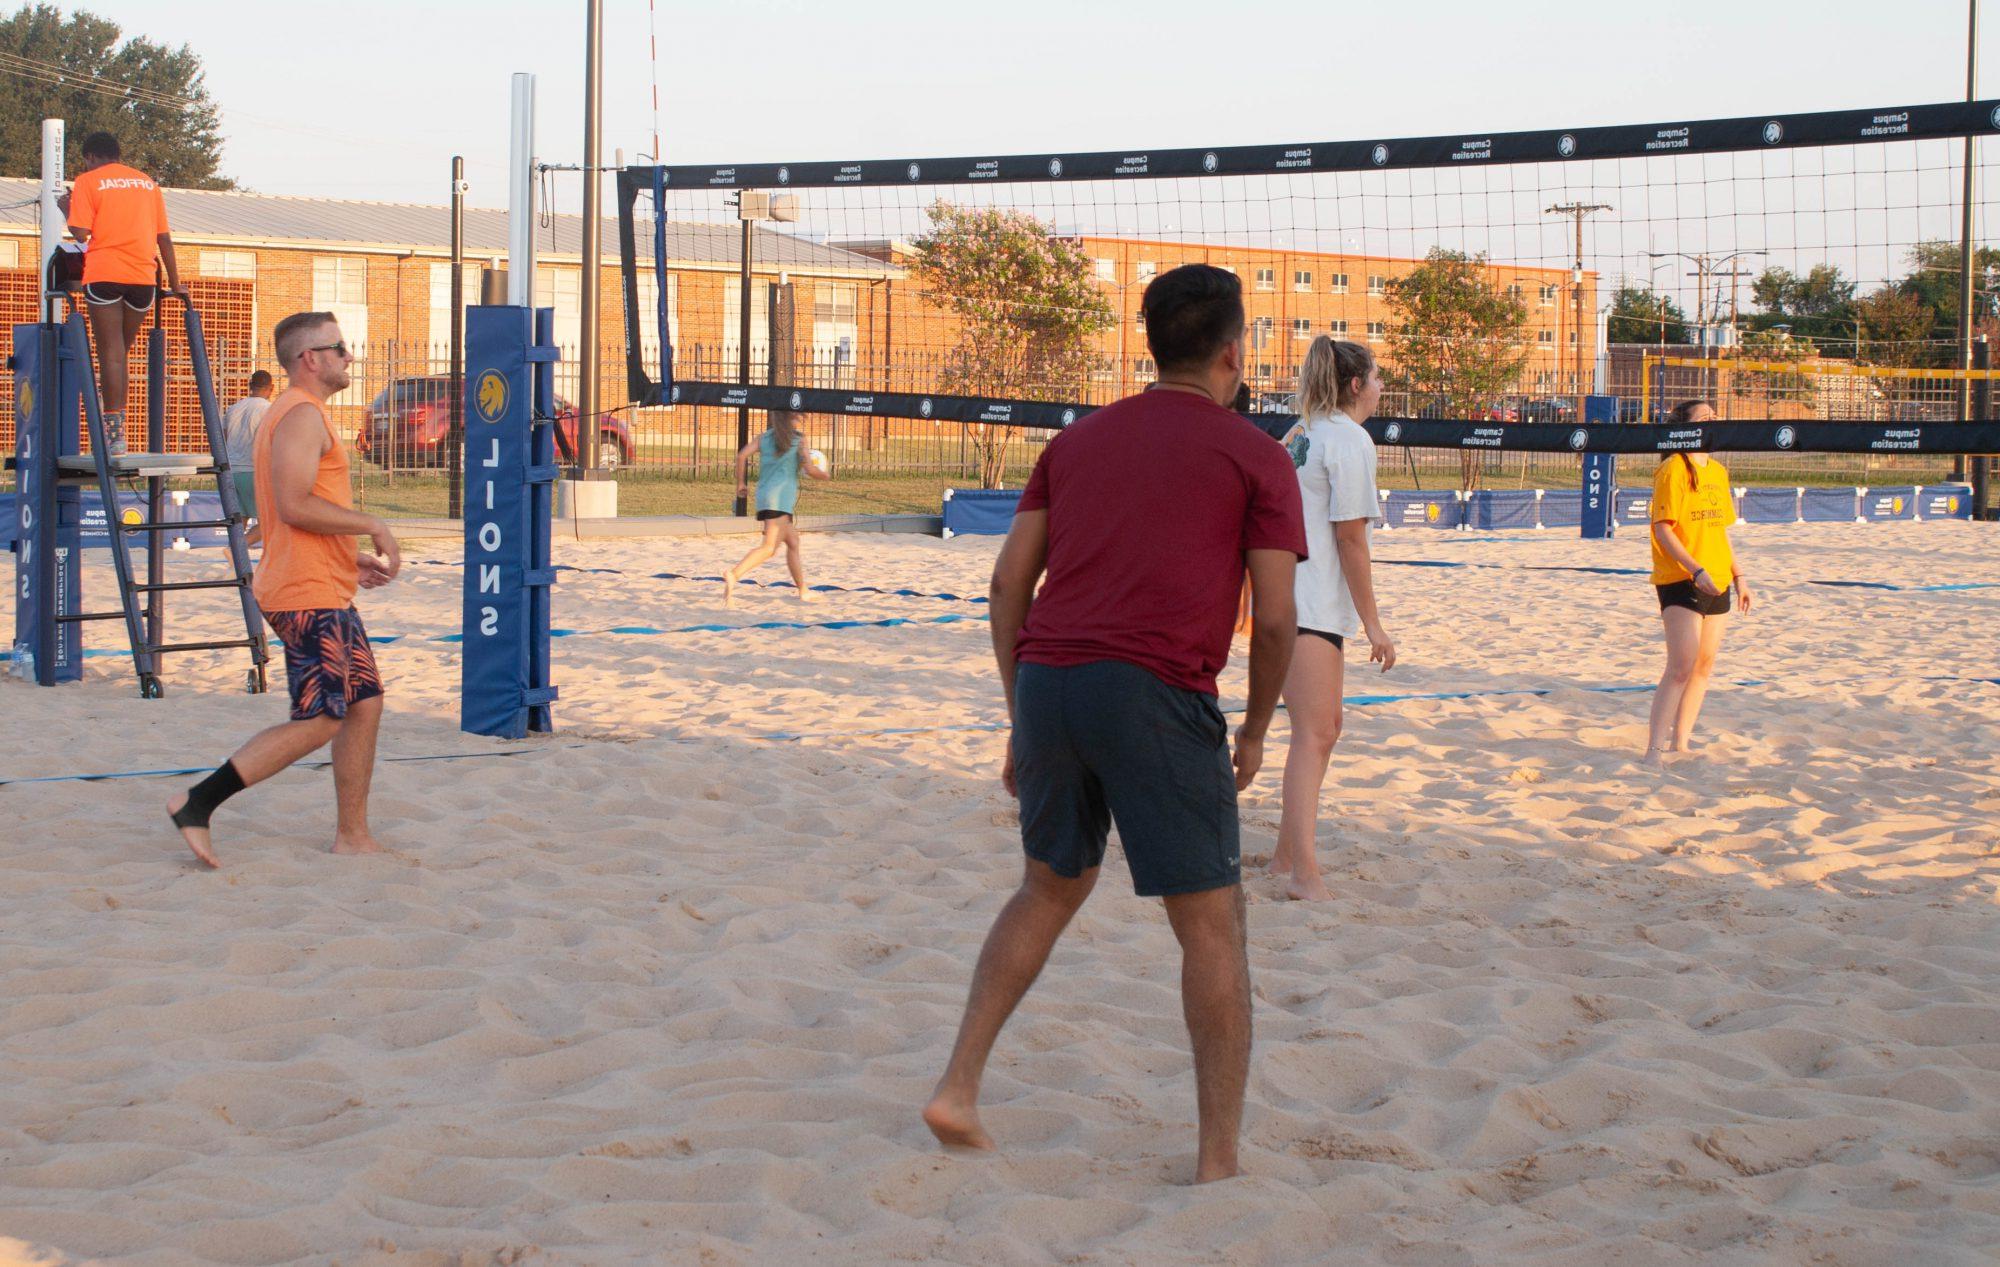 People playing Sand Volleyball on blue net court